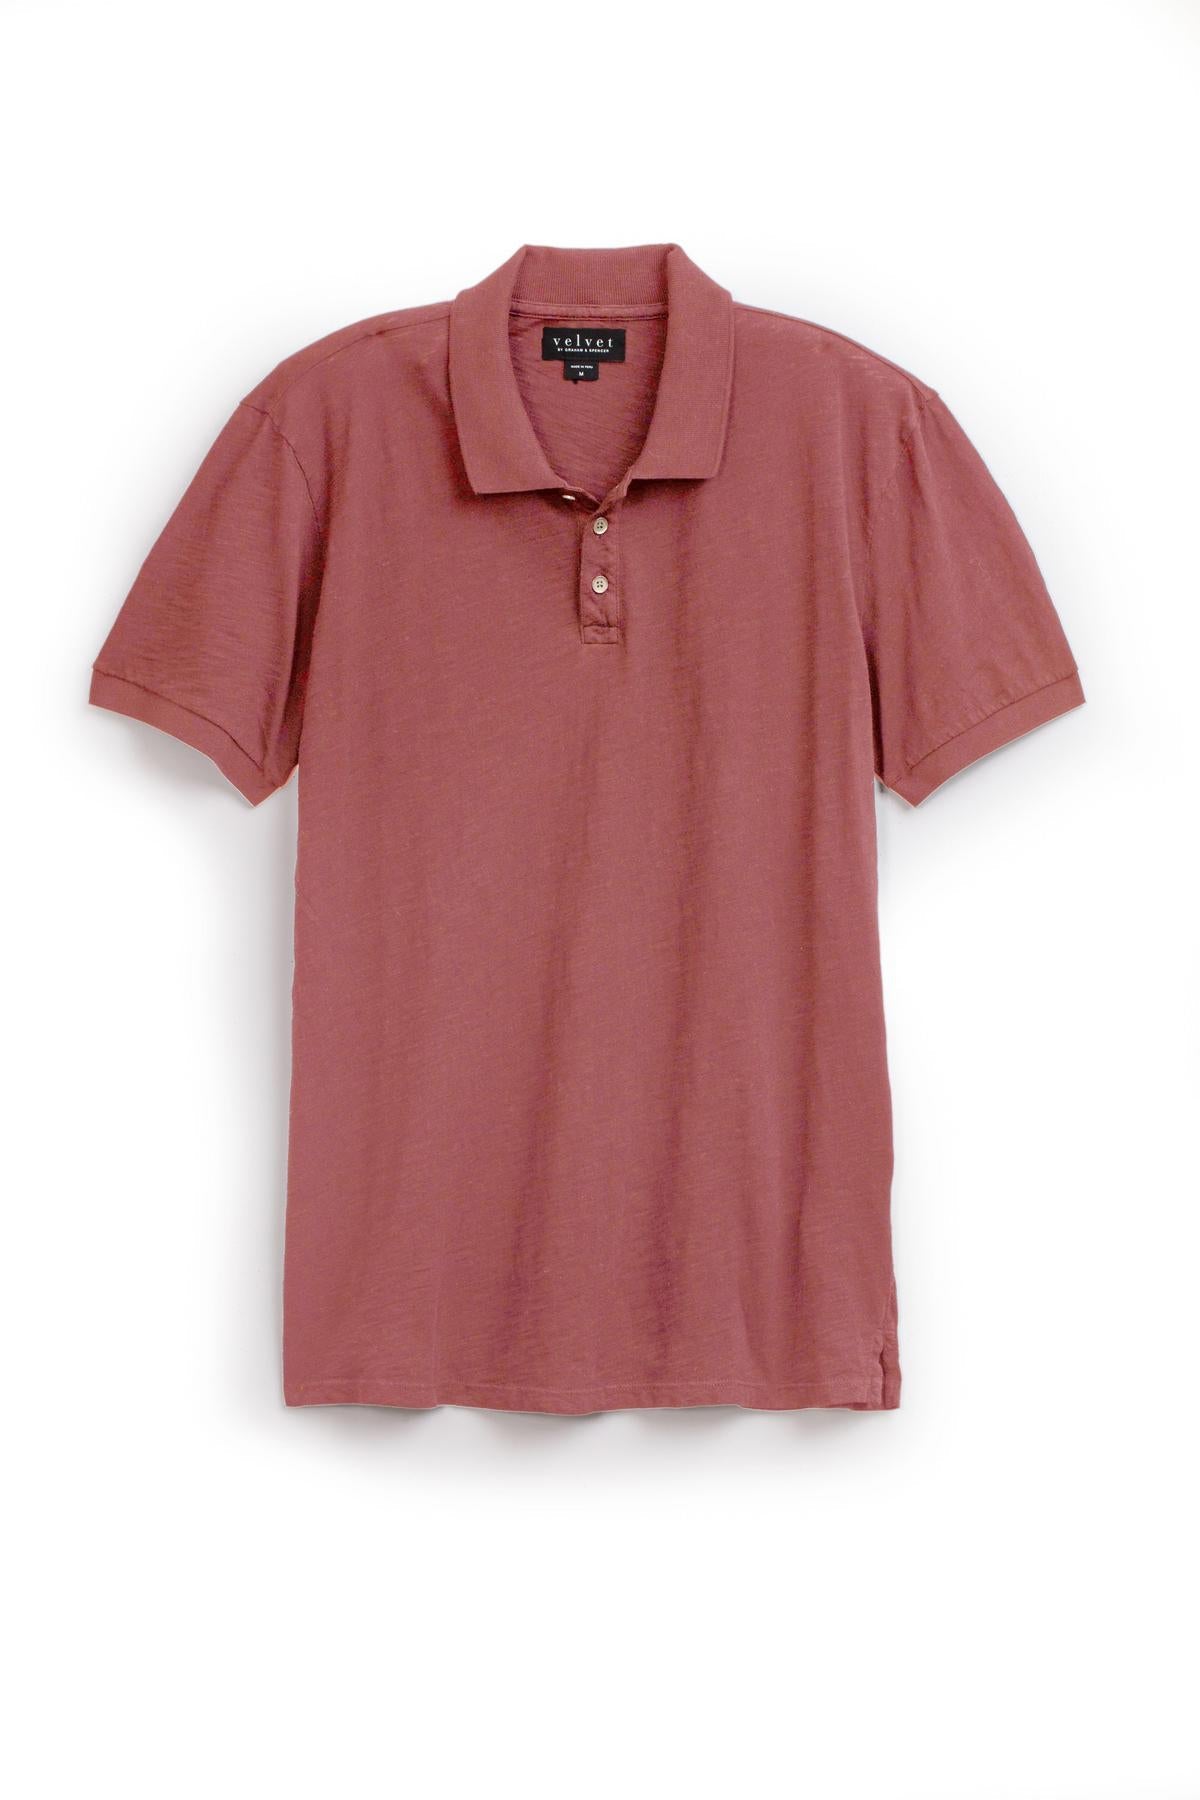 A NIKO POLO hand polo shirt in pink on a white background, giving off a vintage-feel from Velvet by Graham & Spencer.-35783017693377